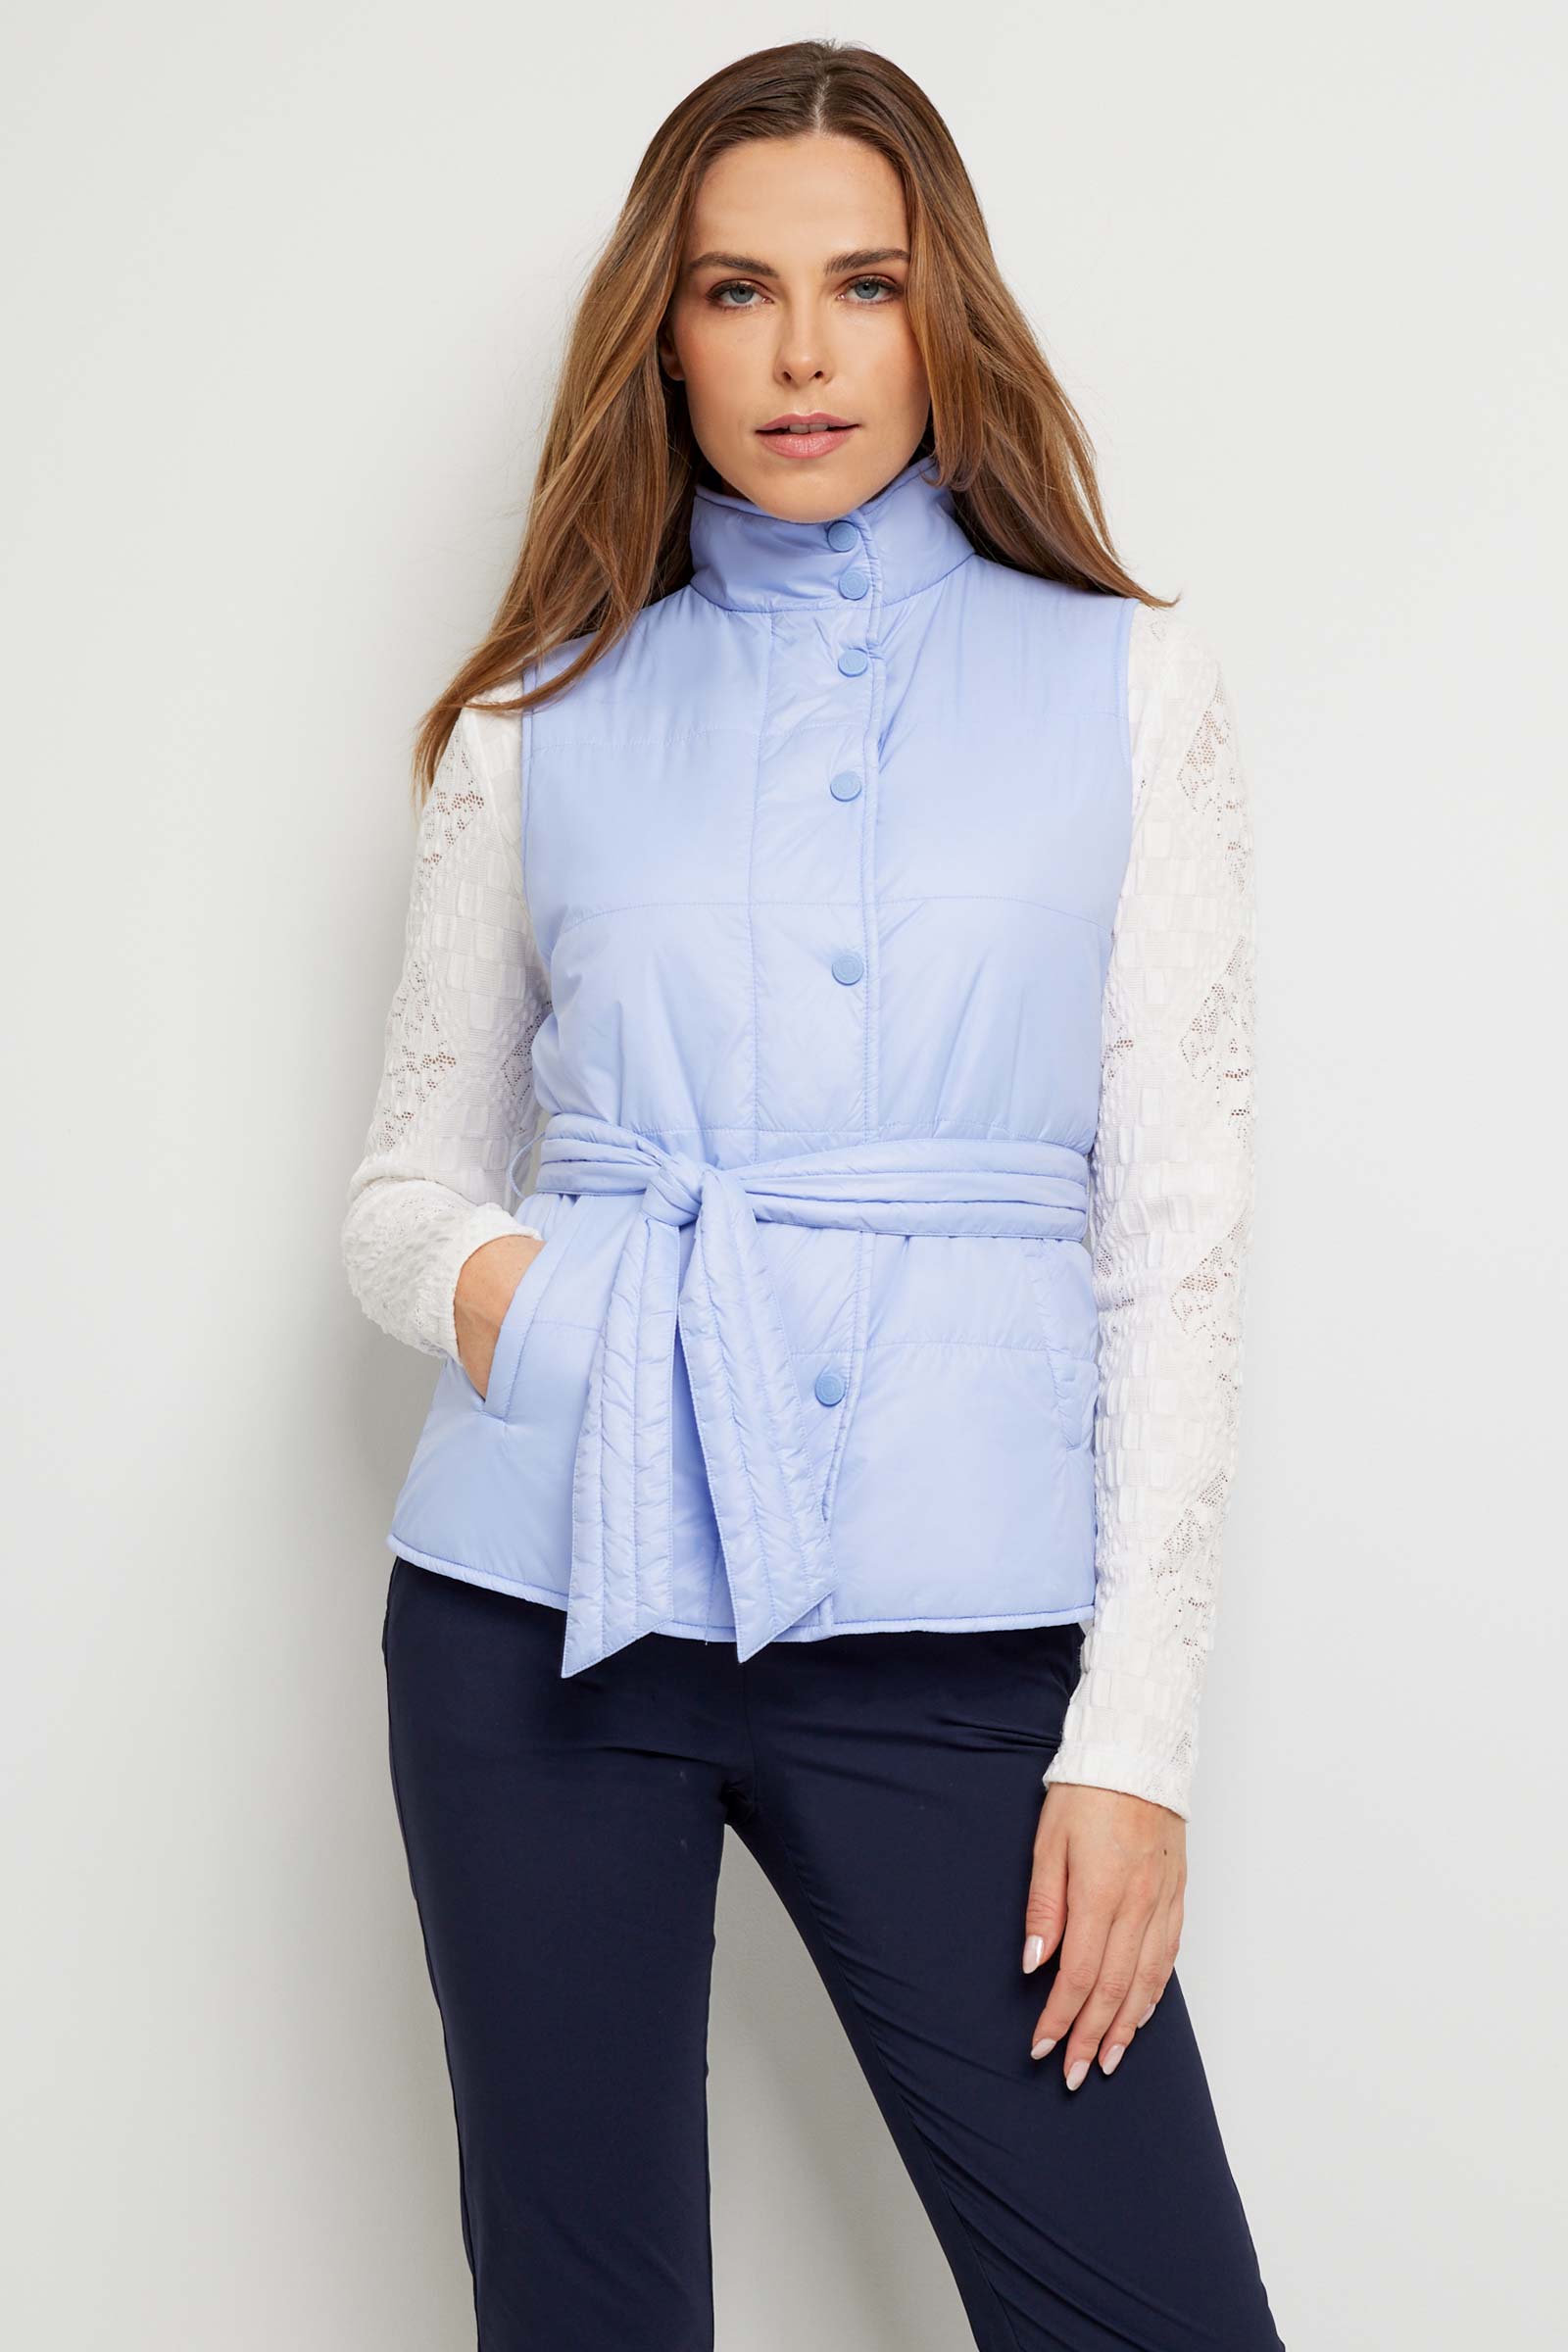 The Best Travel Vest. Woman Showing the Buttoned Up Front Profile of an Ainslee Quilted Vest in Periwinkle